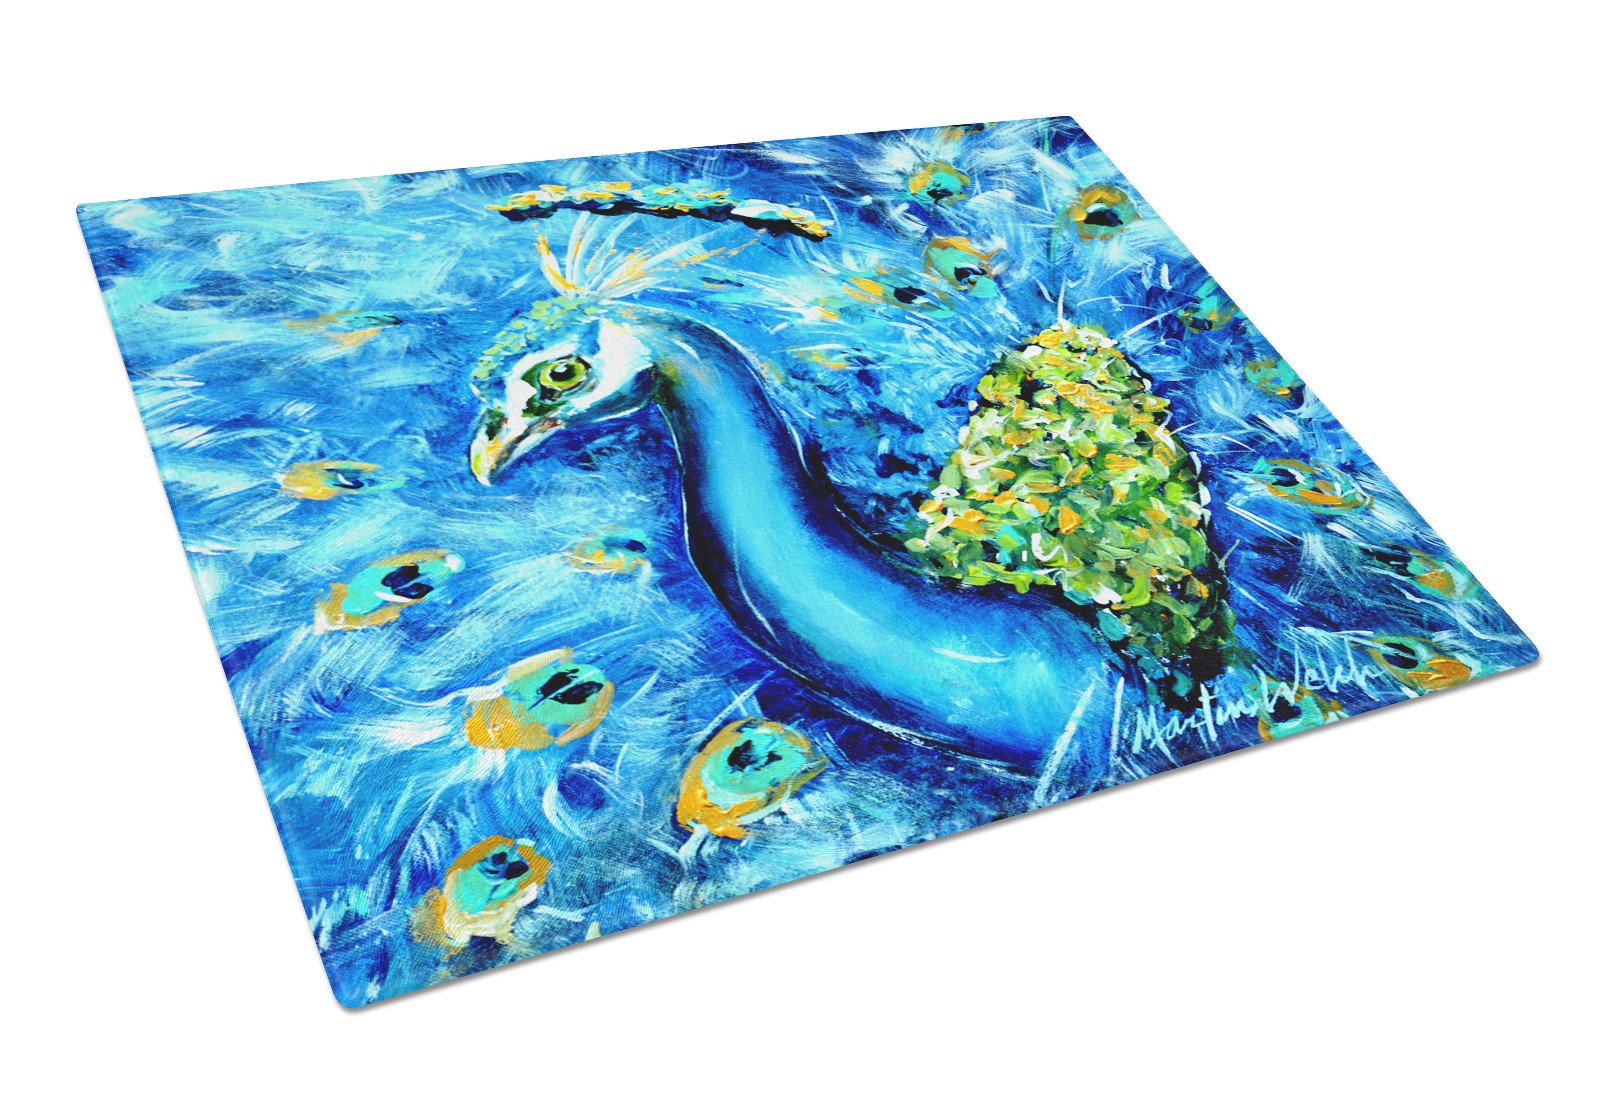 Peacock Straight Up in Blue Glass Cutting Board Large Size MW1166LCB by Caroline's Treasures